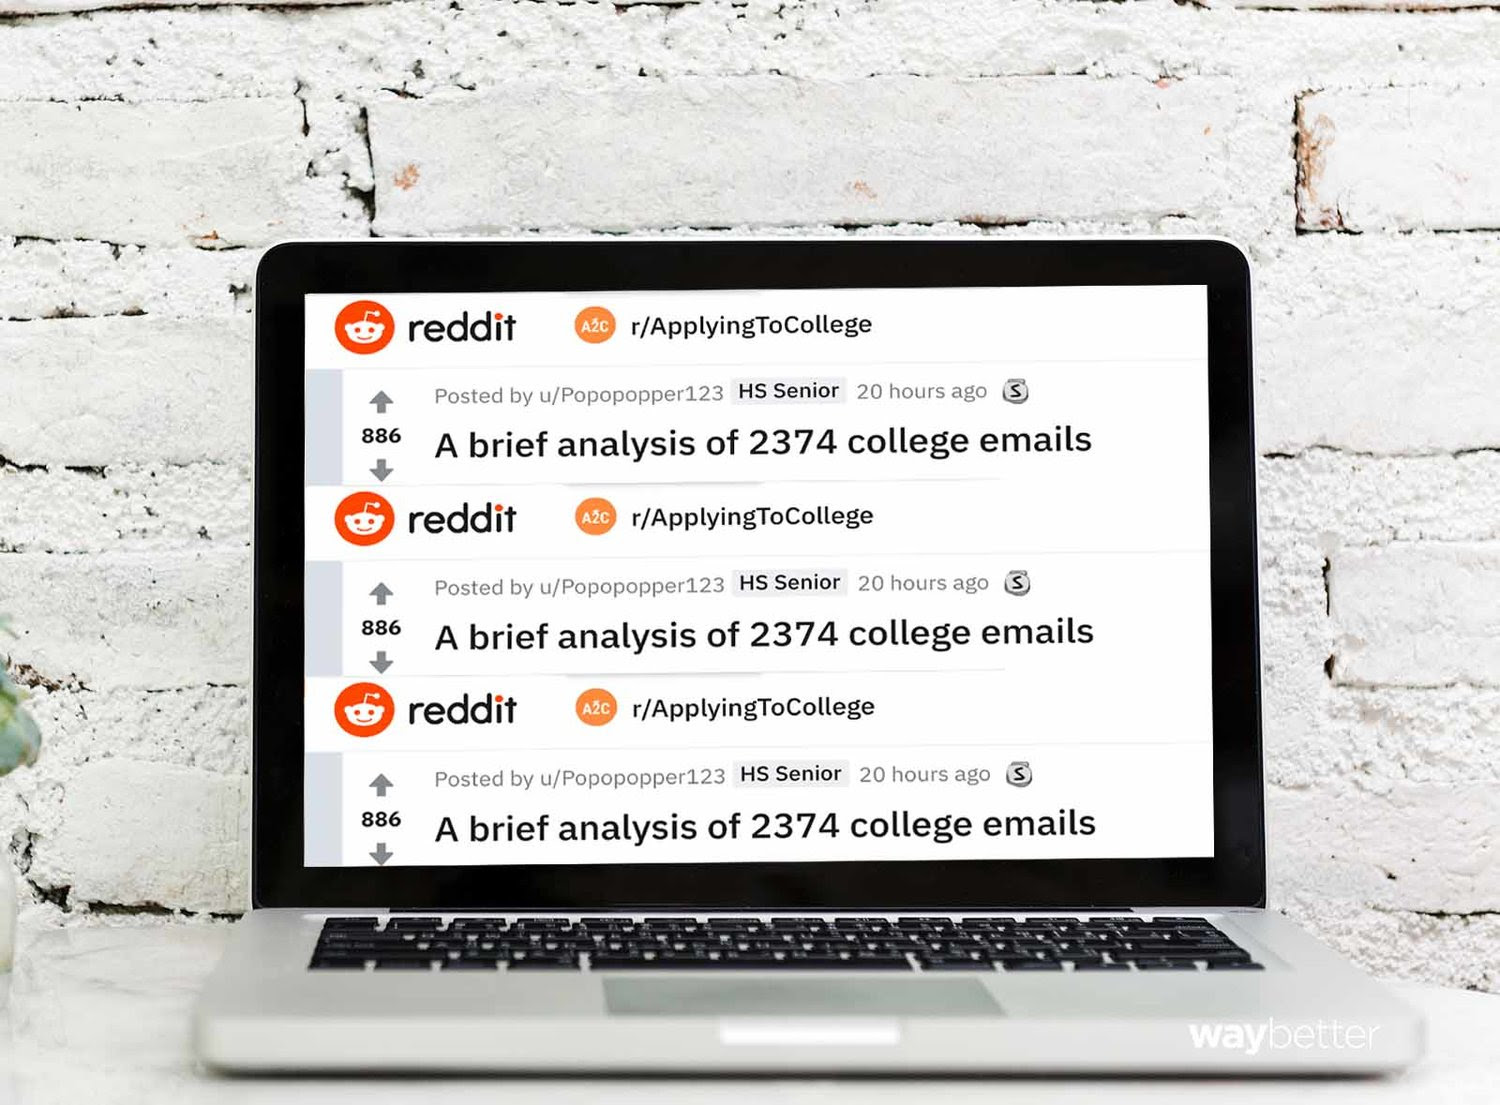 An Interview With The Student Who Analyzed 2 374 College Emails On - an interview with the student who analyzed 2 374 college emails on reddit waybetter